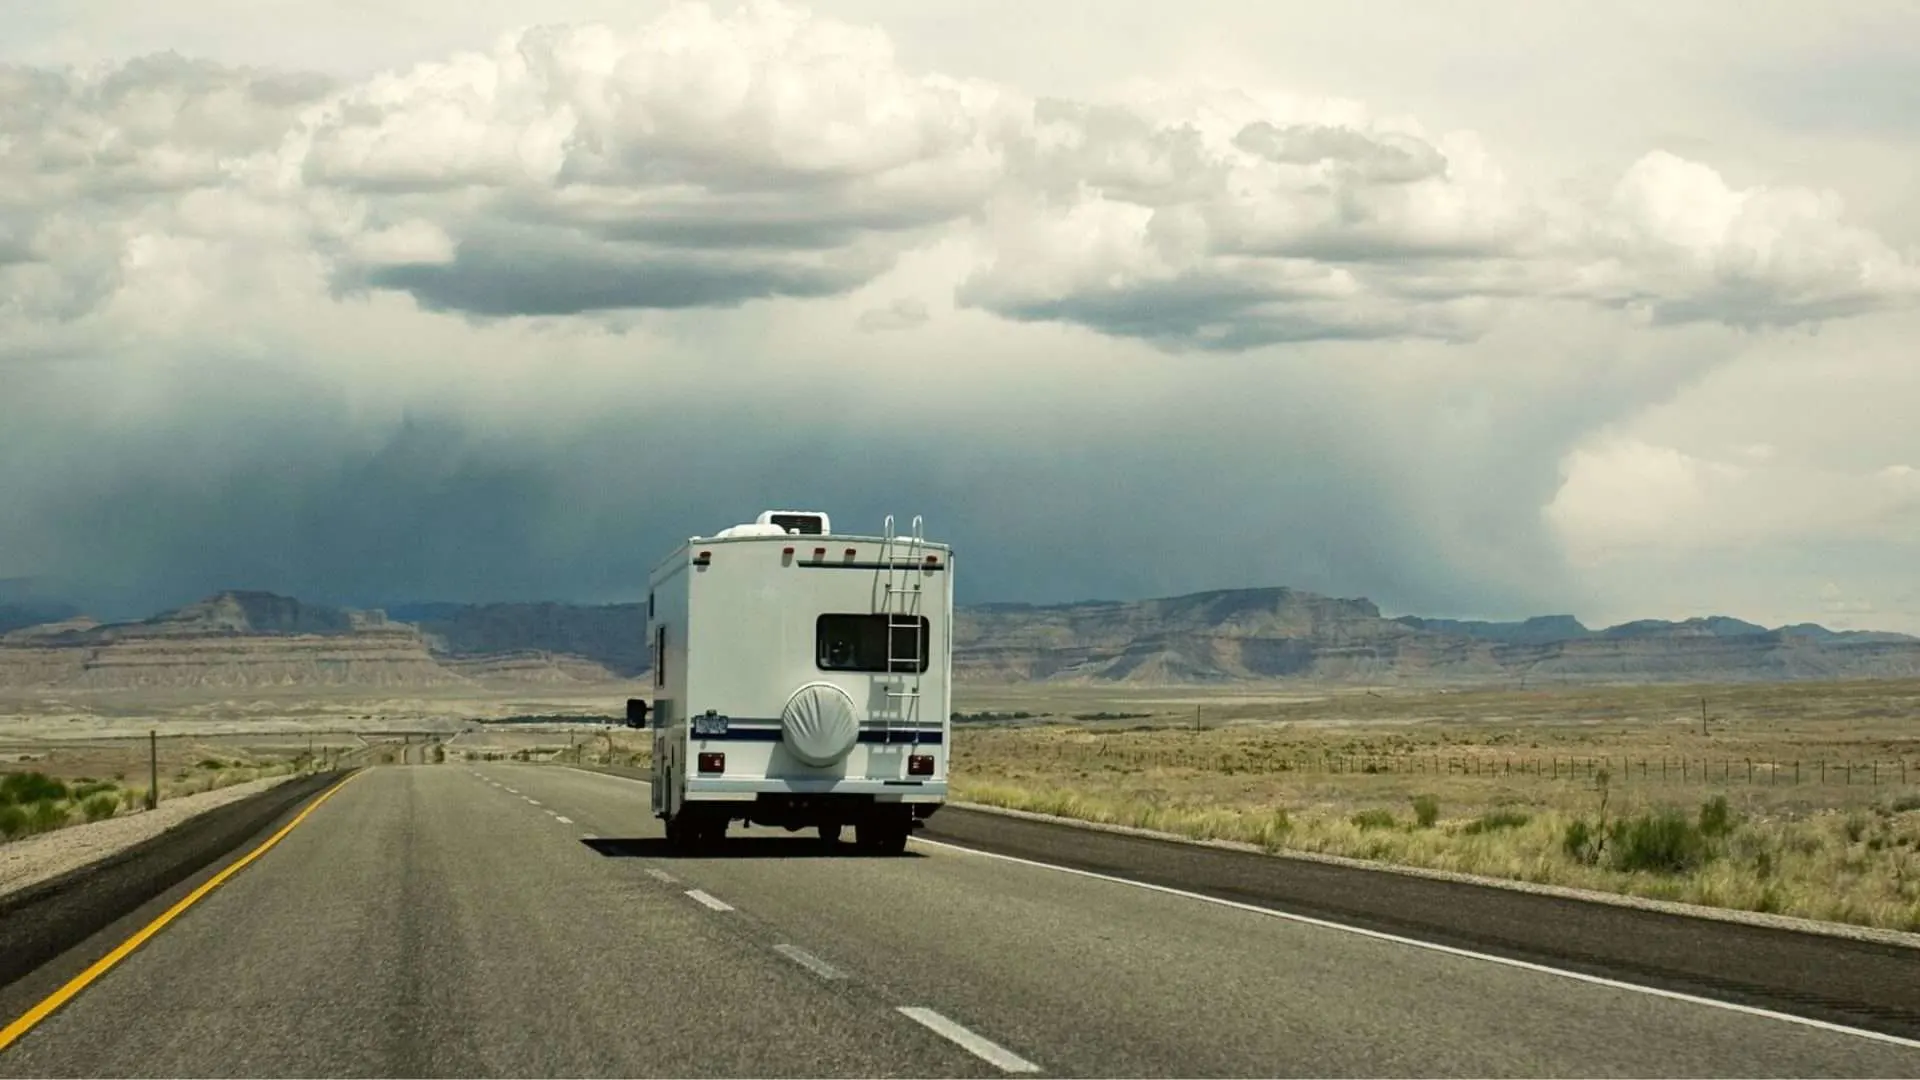 Class C RV driving towards storm clouds